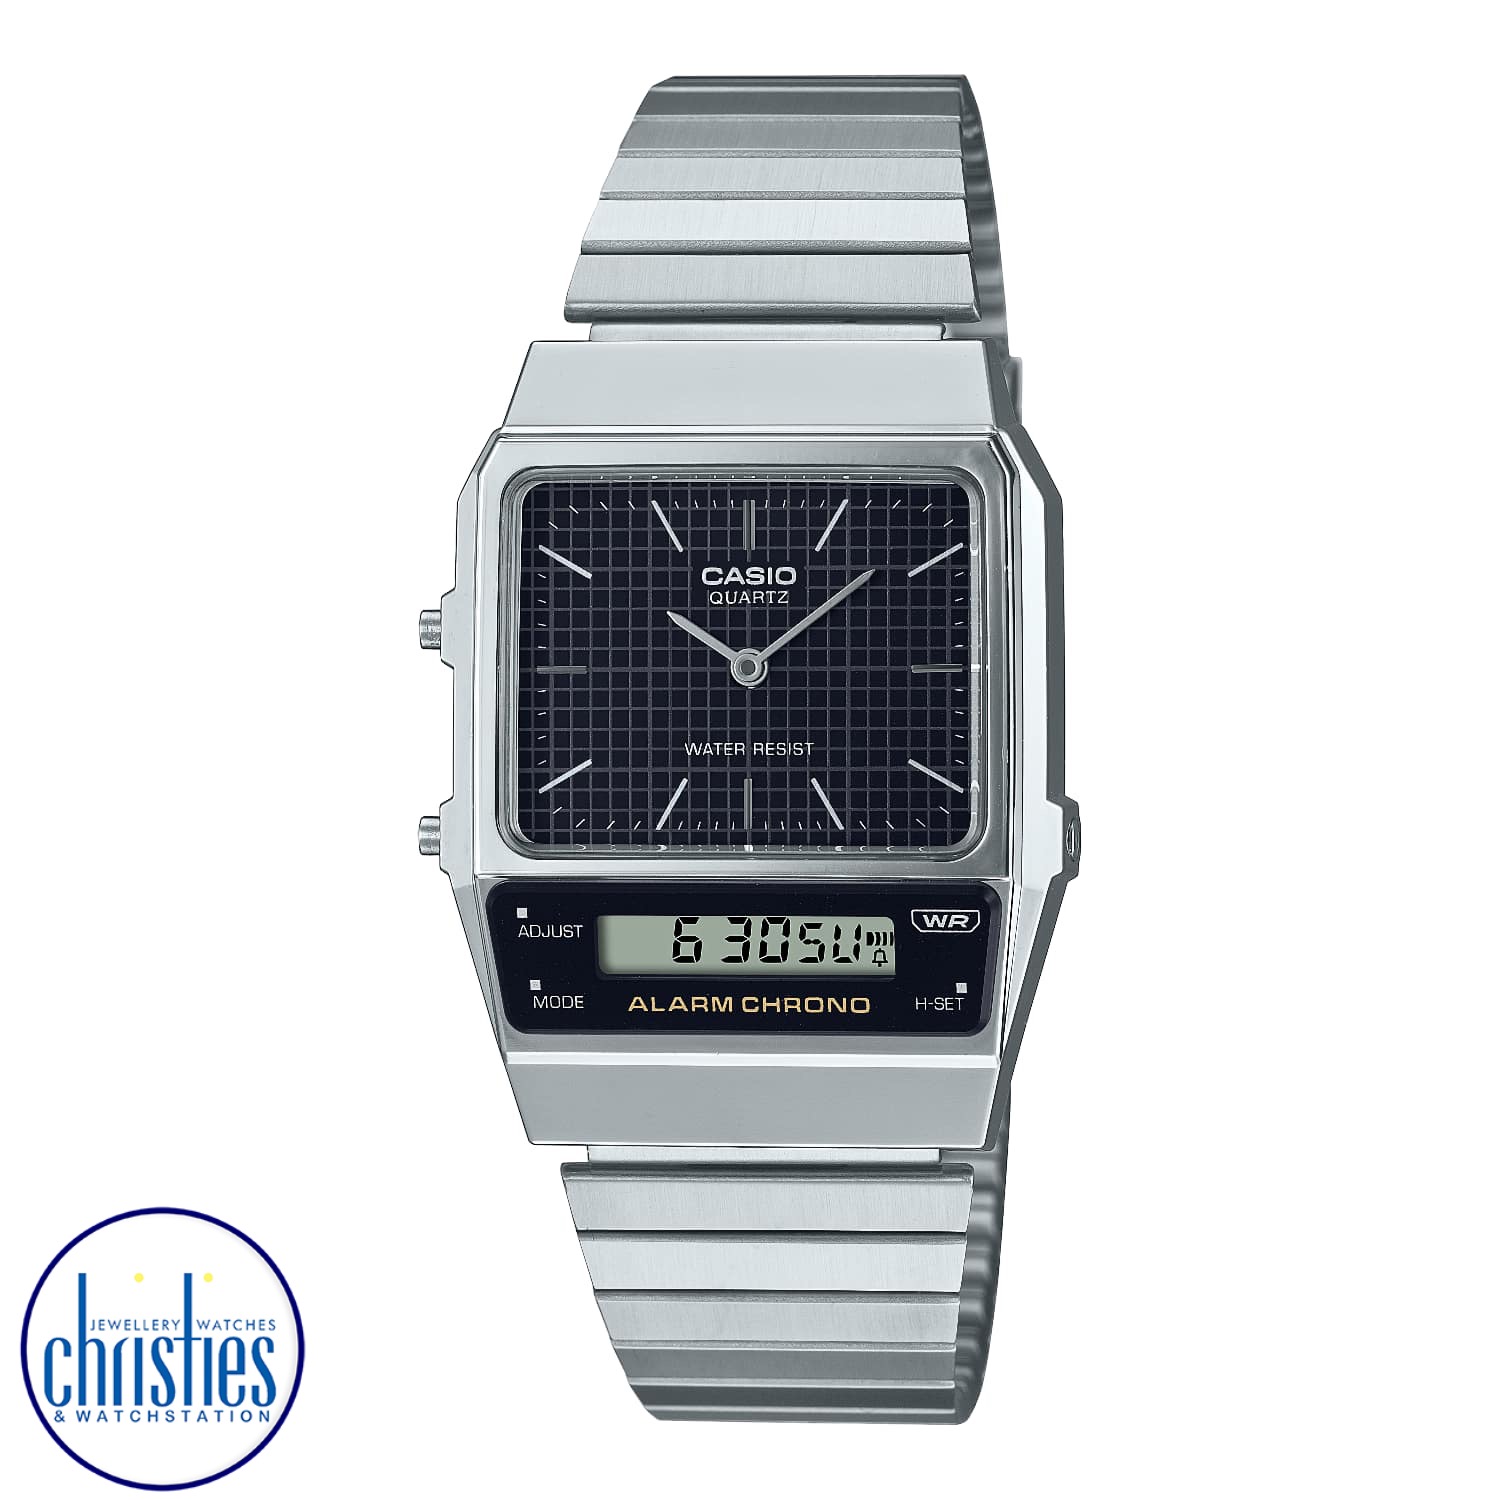 AQ800E-1A Casio Vintage Series Watch. Reboot your retro vintage style with a contemporary update on the 1980s AQ-450 design.